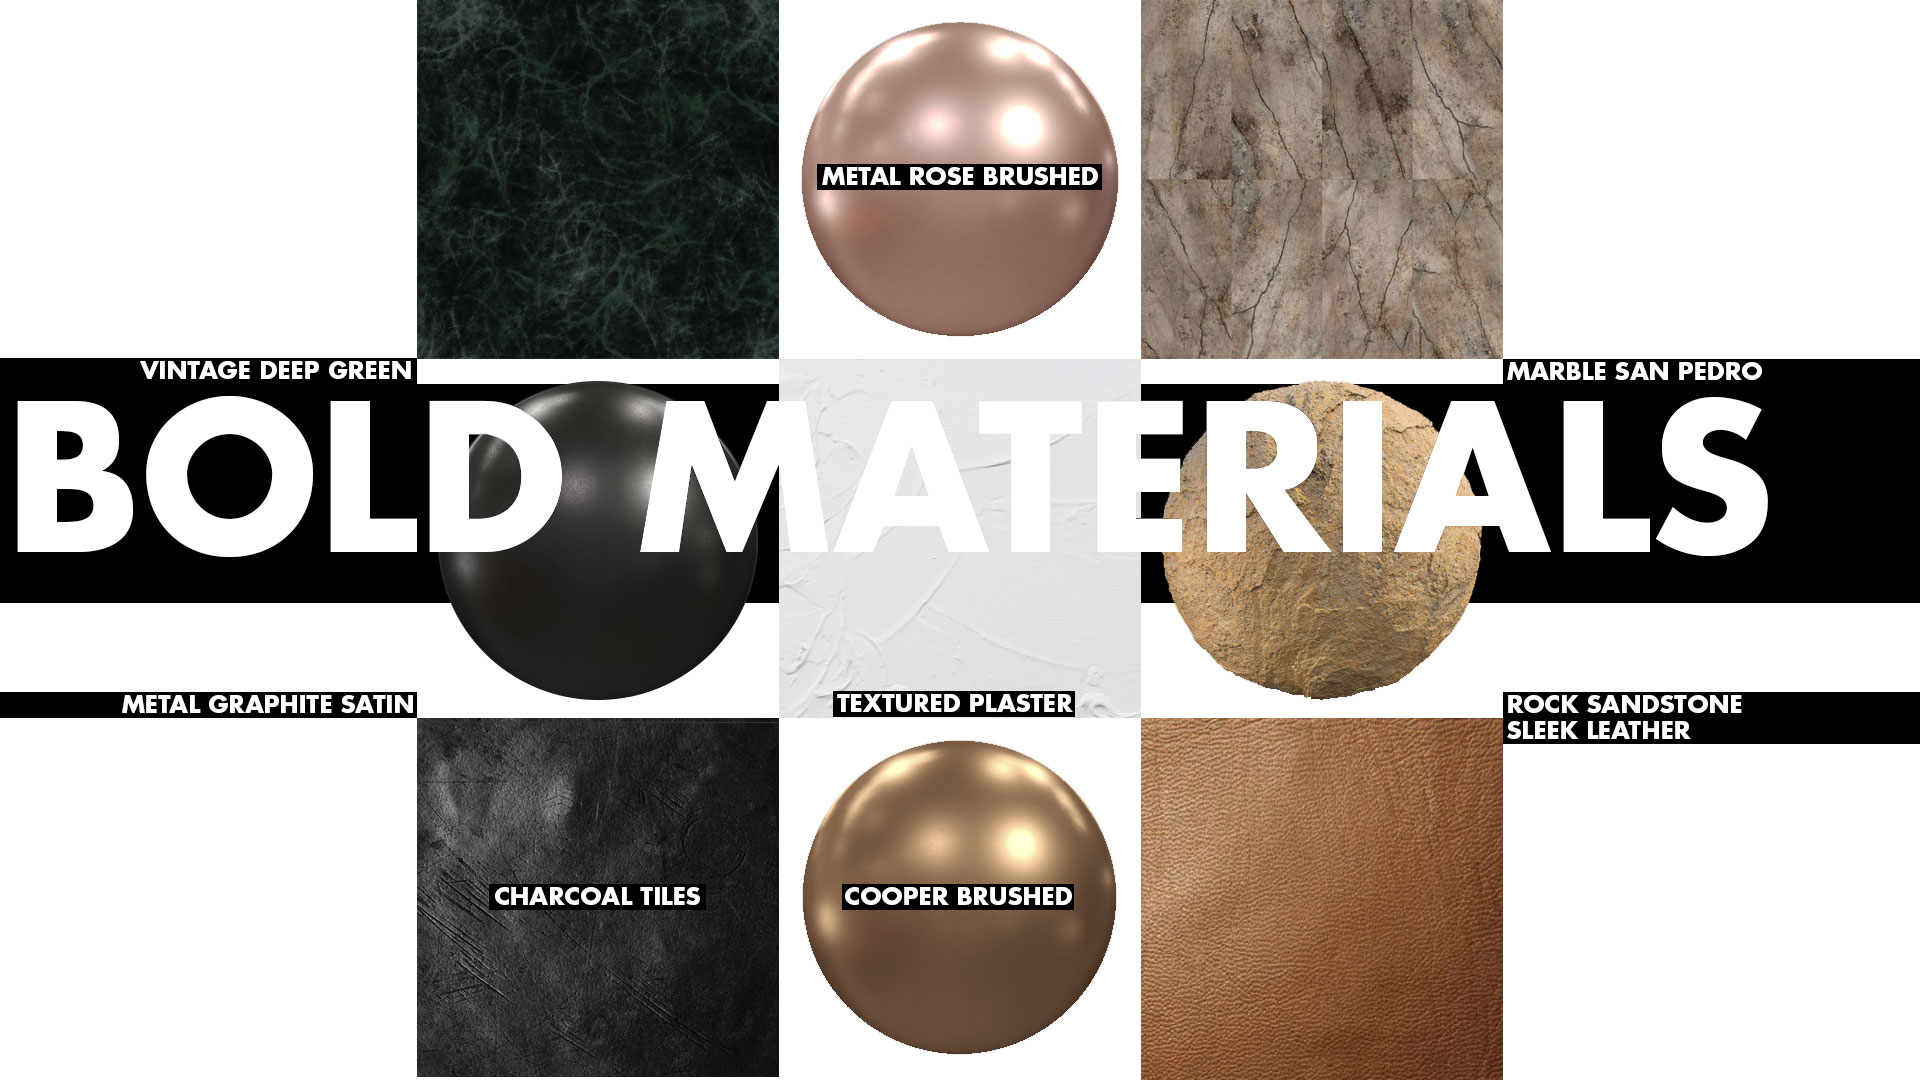 The materials used for the interior design of the lobby visualized in 3d.